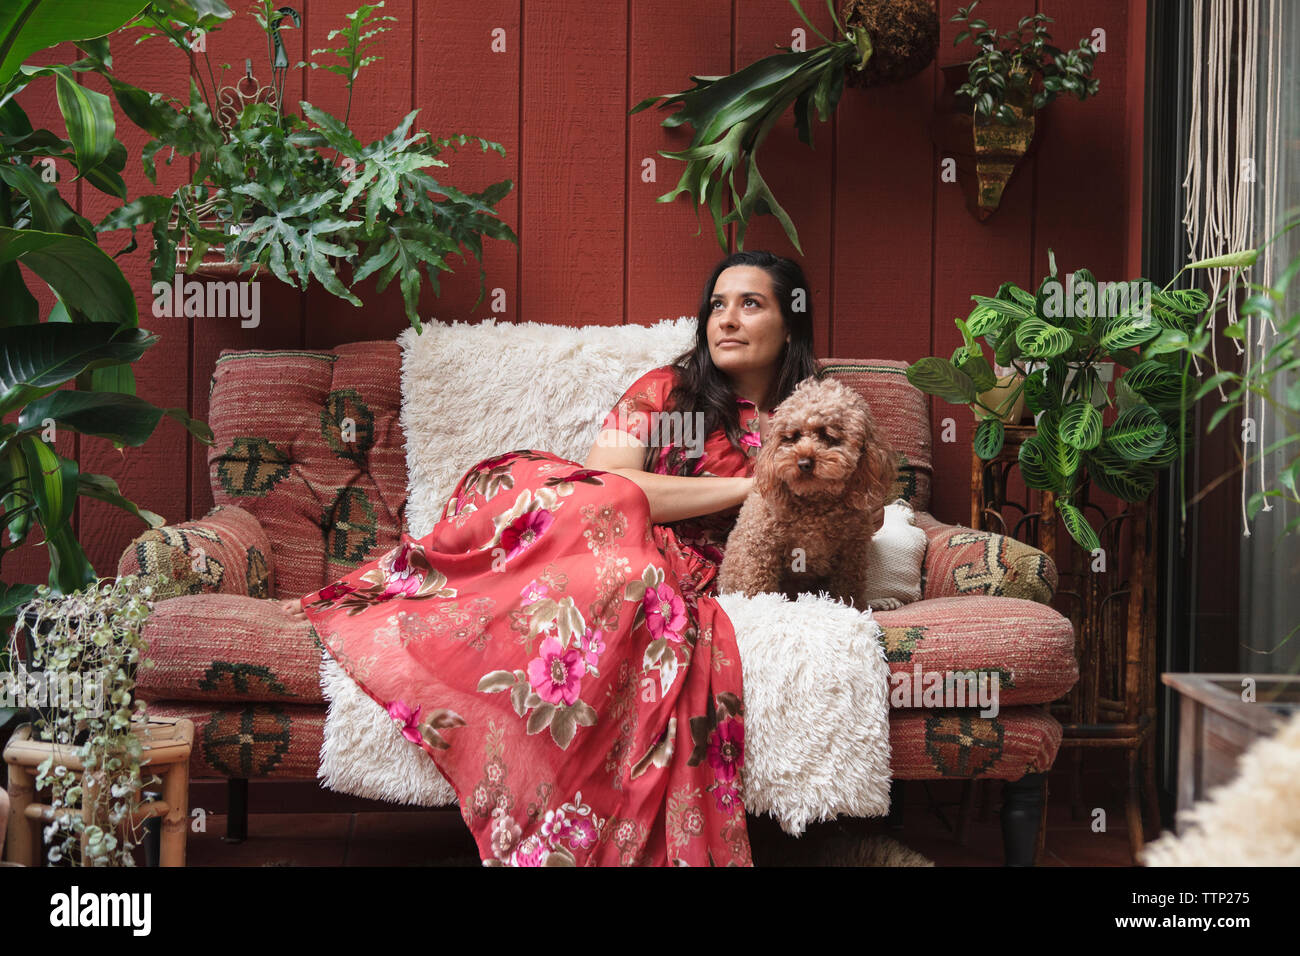 Thoughtful young woman with poodle resting on sofa amidst potted plants at porch Stock Photo